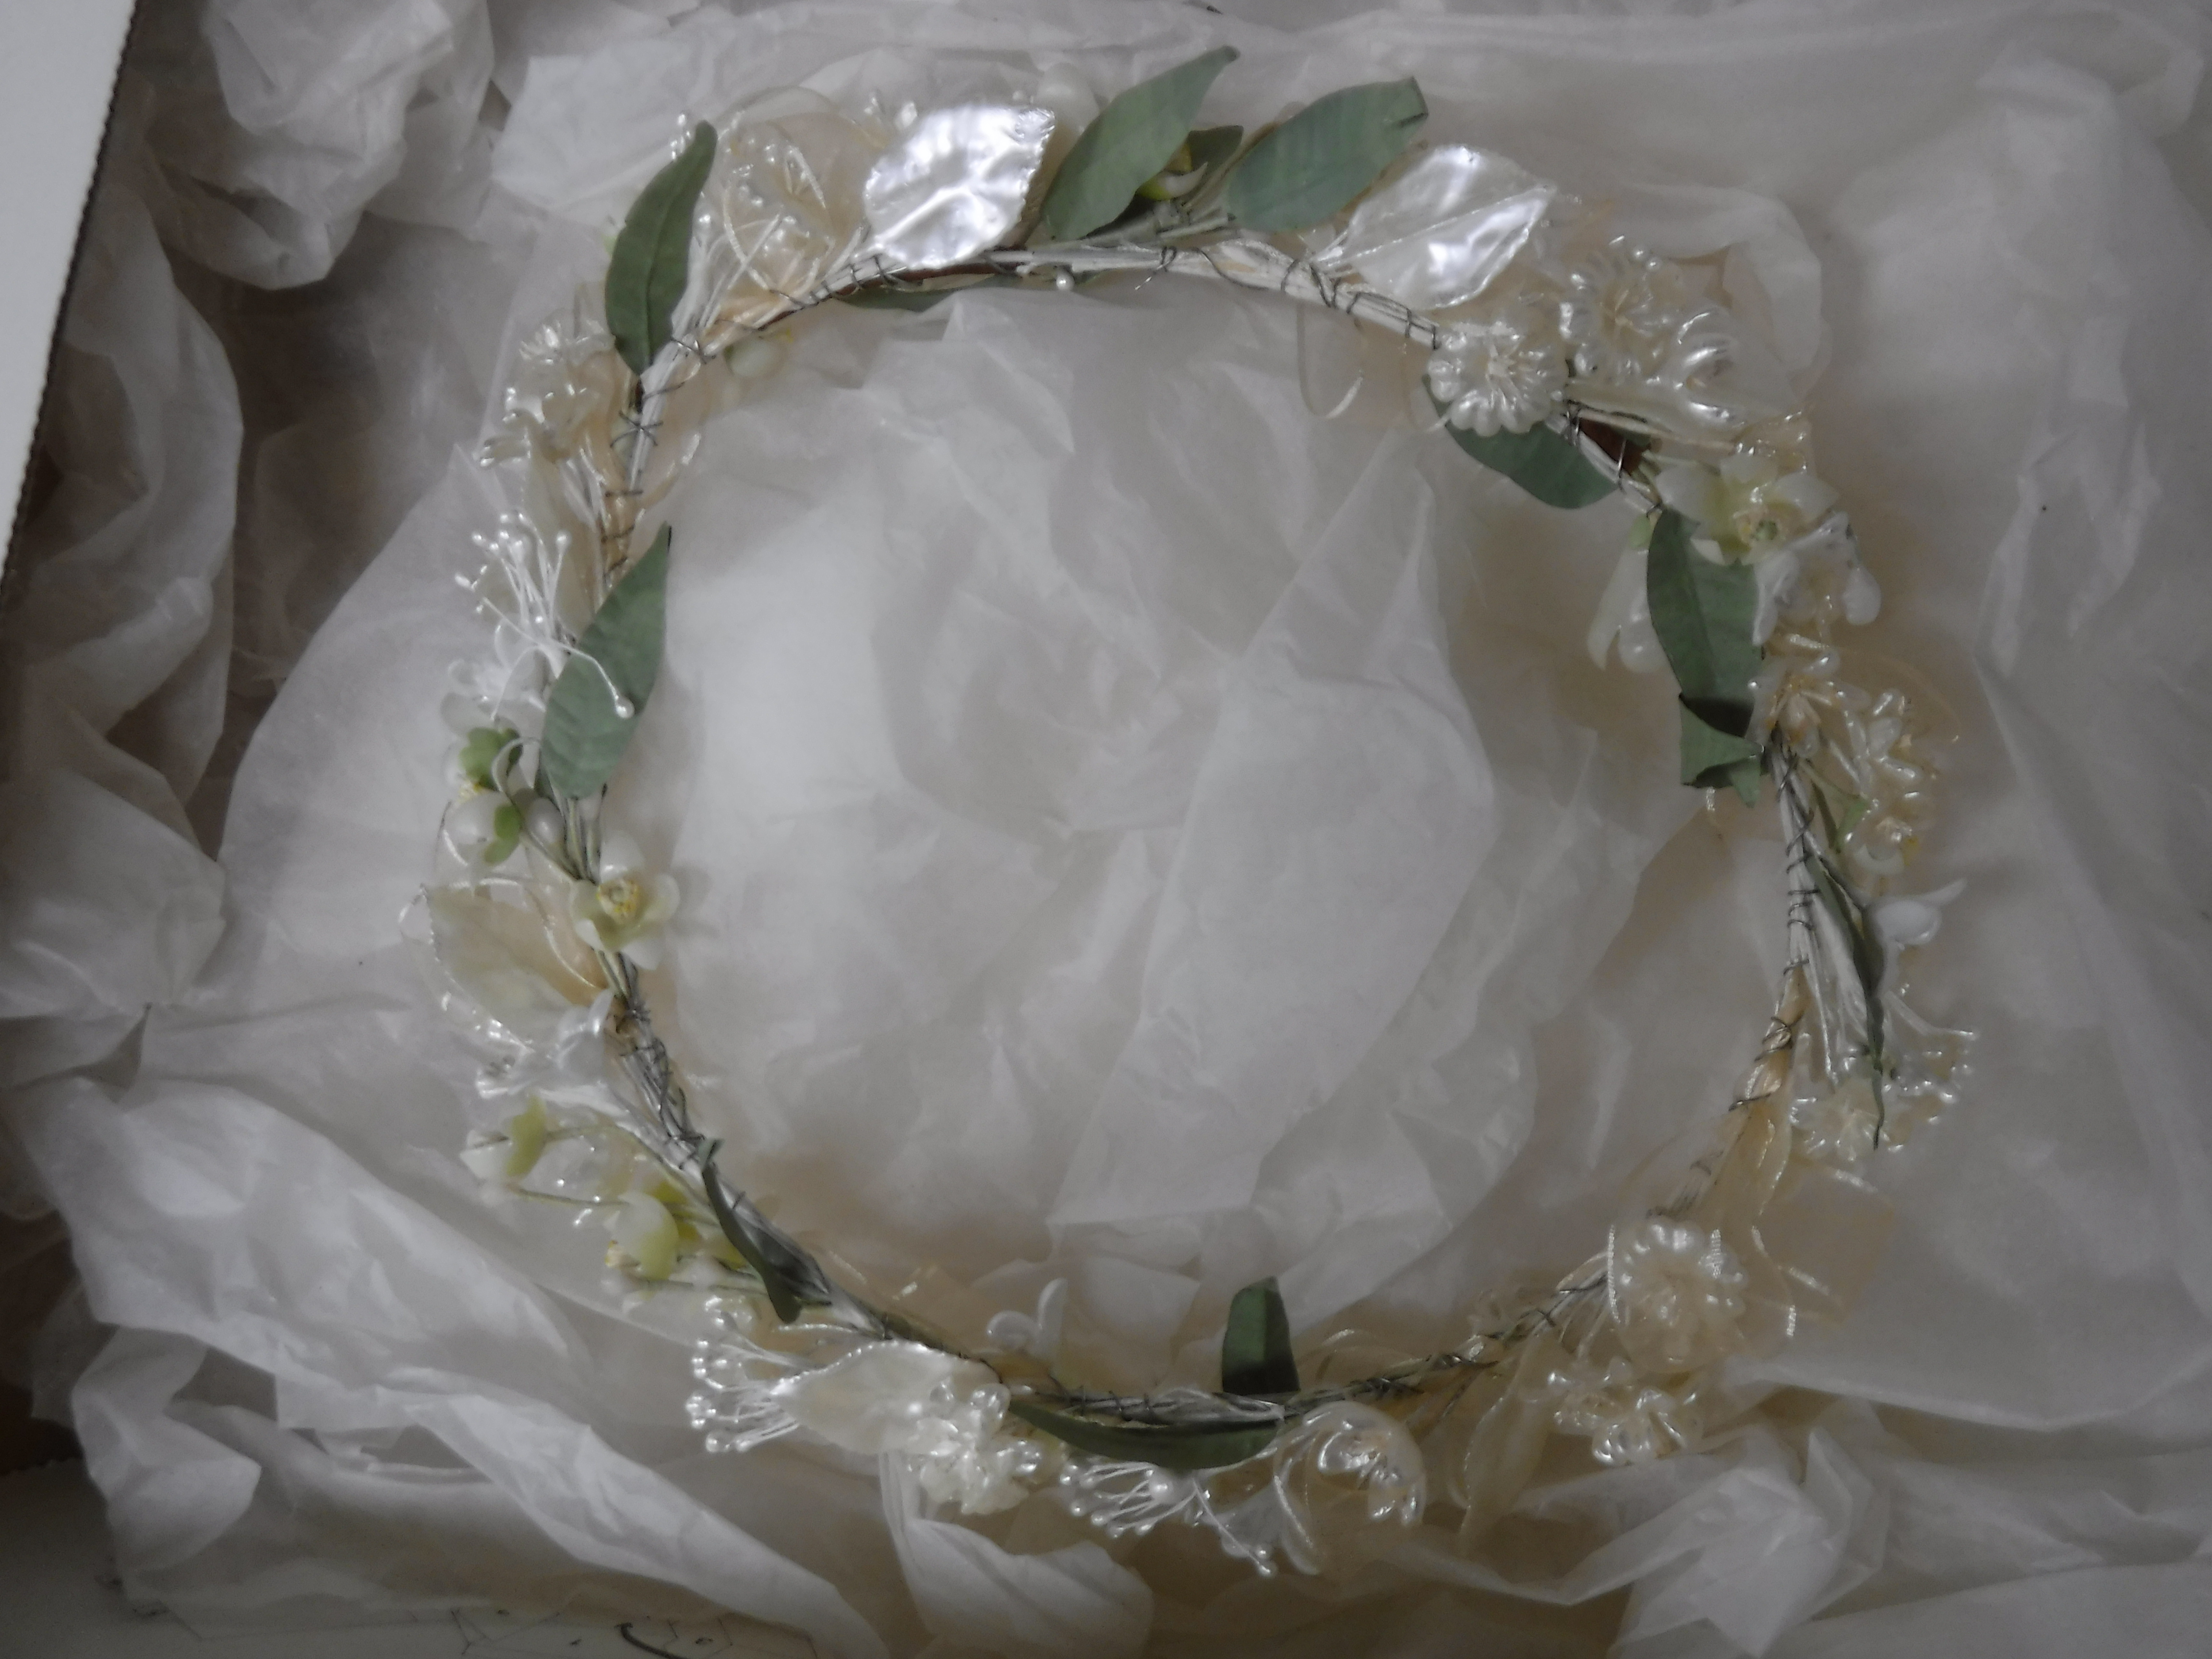 A Lyn Lundie lace work decorated wedding - Image 7 of 7